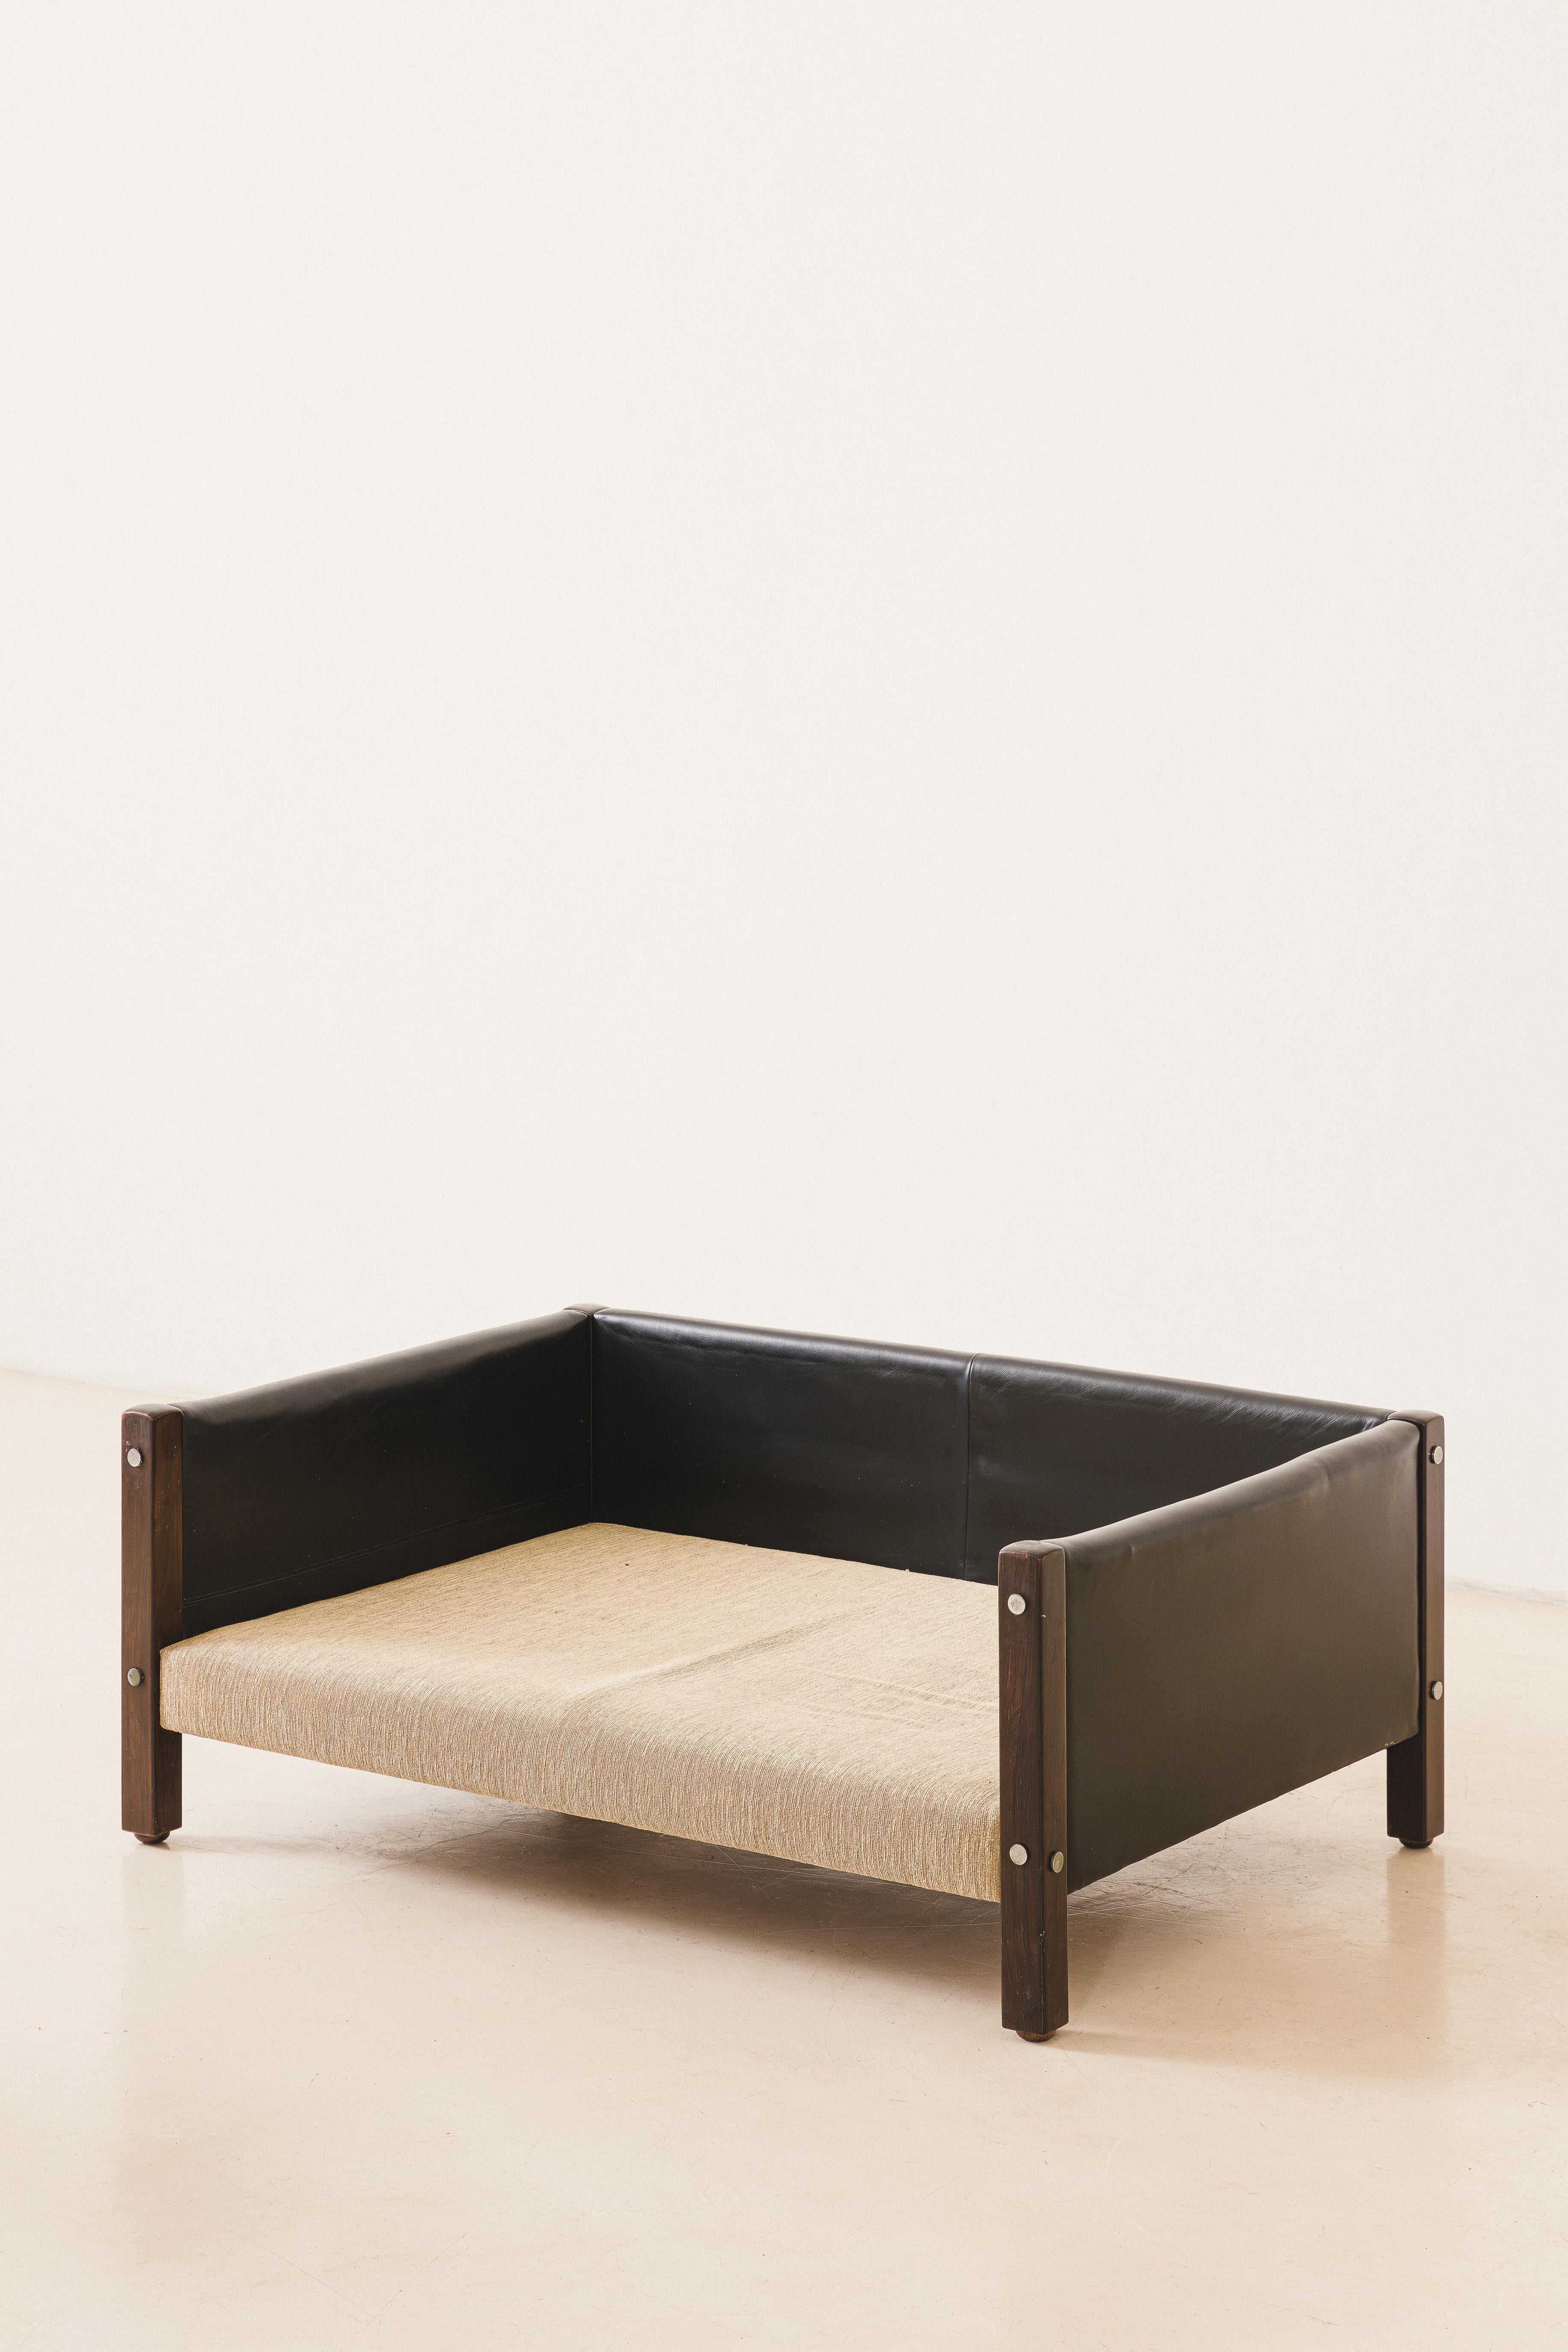 Brazilian Rosewood Two-Seat Millor Sofa, Sergio Rodrigues Modern Design, Brazil, 1960s For Sale